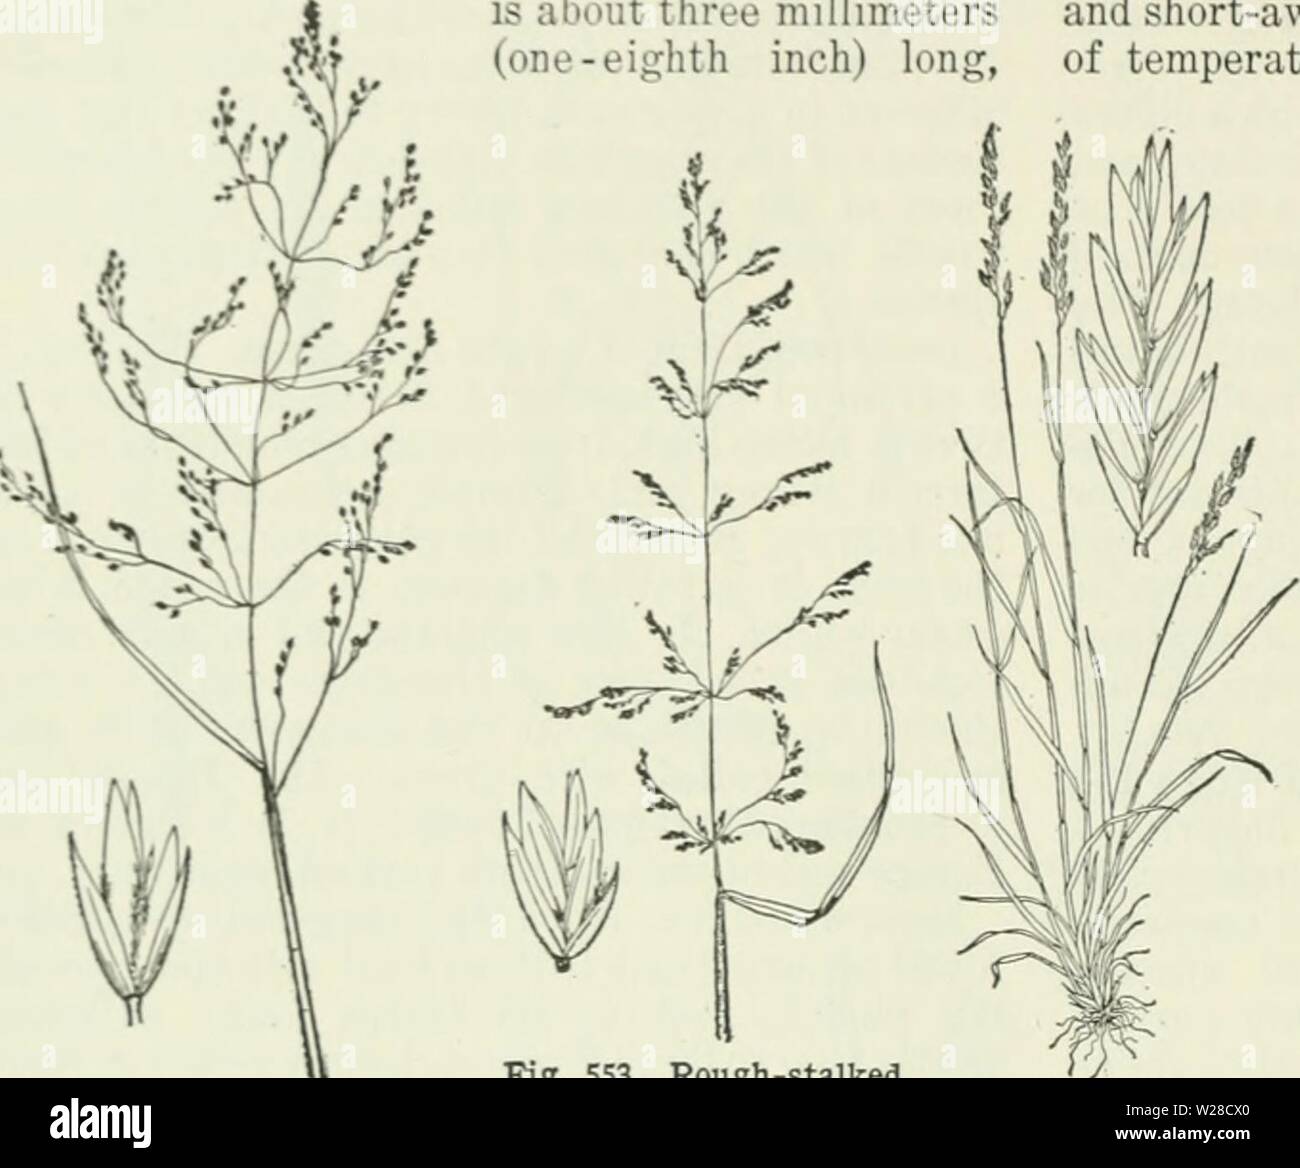 Archive image from page 421 of Cyclopedia of farm crops . Cyclopedia of farm crops : a popular survey of crops and crop-making methods in the United States and Canada  cyclopediaoffarm00bailuoft Year: 1922, c1907  374 GRASSES GRASSES tnflora, Gelib. (P. serotina, Ehrh.). Fowl Meadow- grass. (Fig. 5r»2.) This grass closely resembles P. ncmoralis. It usually grows taller and has a larger panicle. Frobably the best character to distinguish between the two is the ligule, which in triflora is about three millimeters (one-eighth inch) long,    Fig. 552. Fowl meadow-grass (Pnn triflora) and enlarged Stock Photo